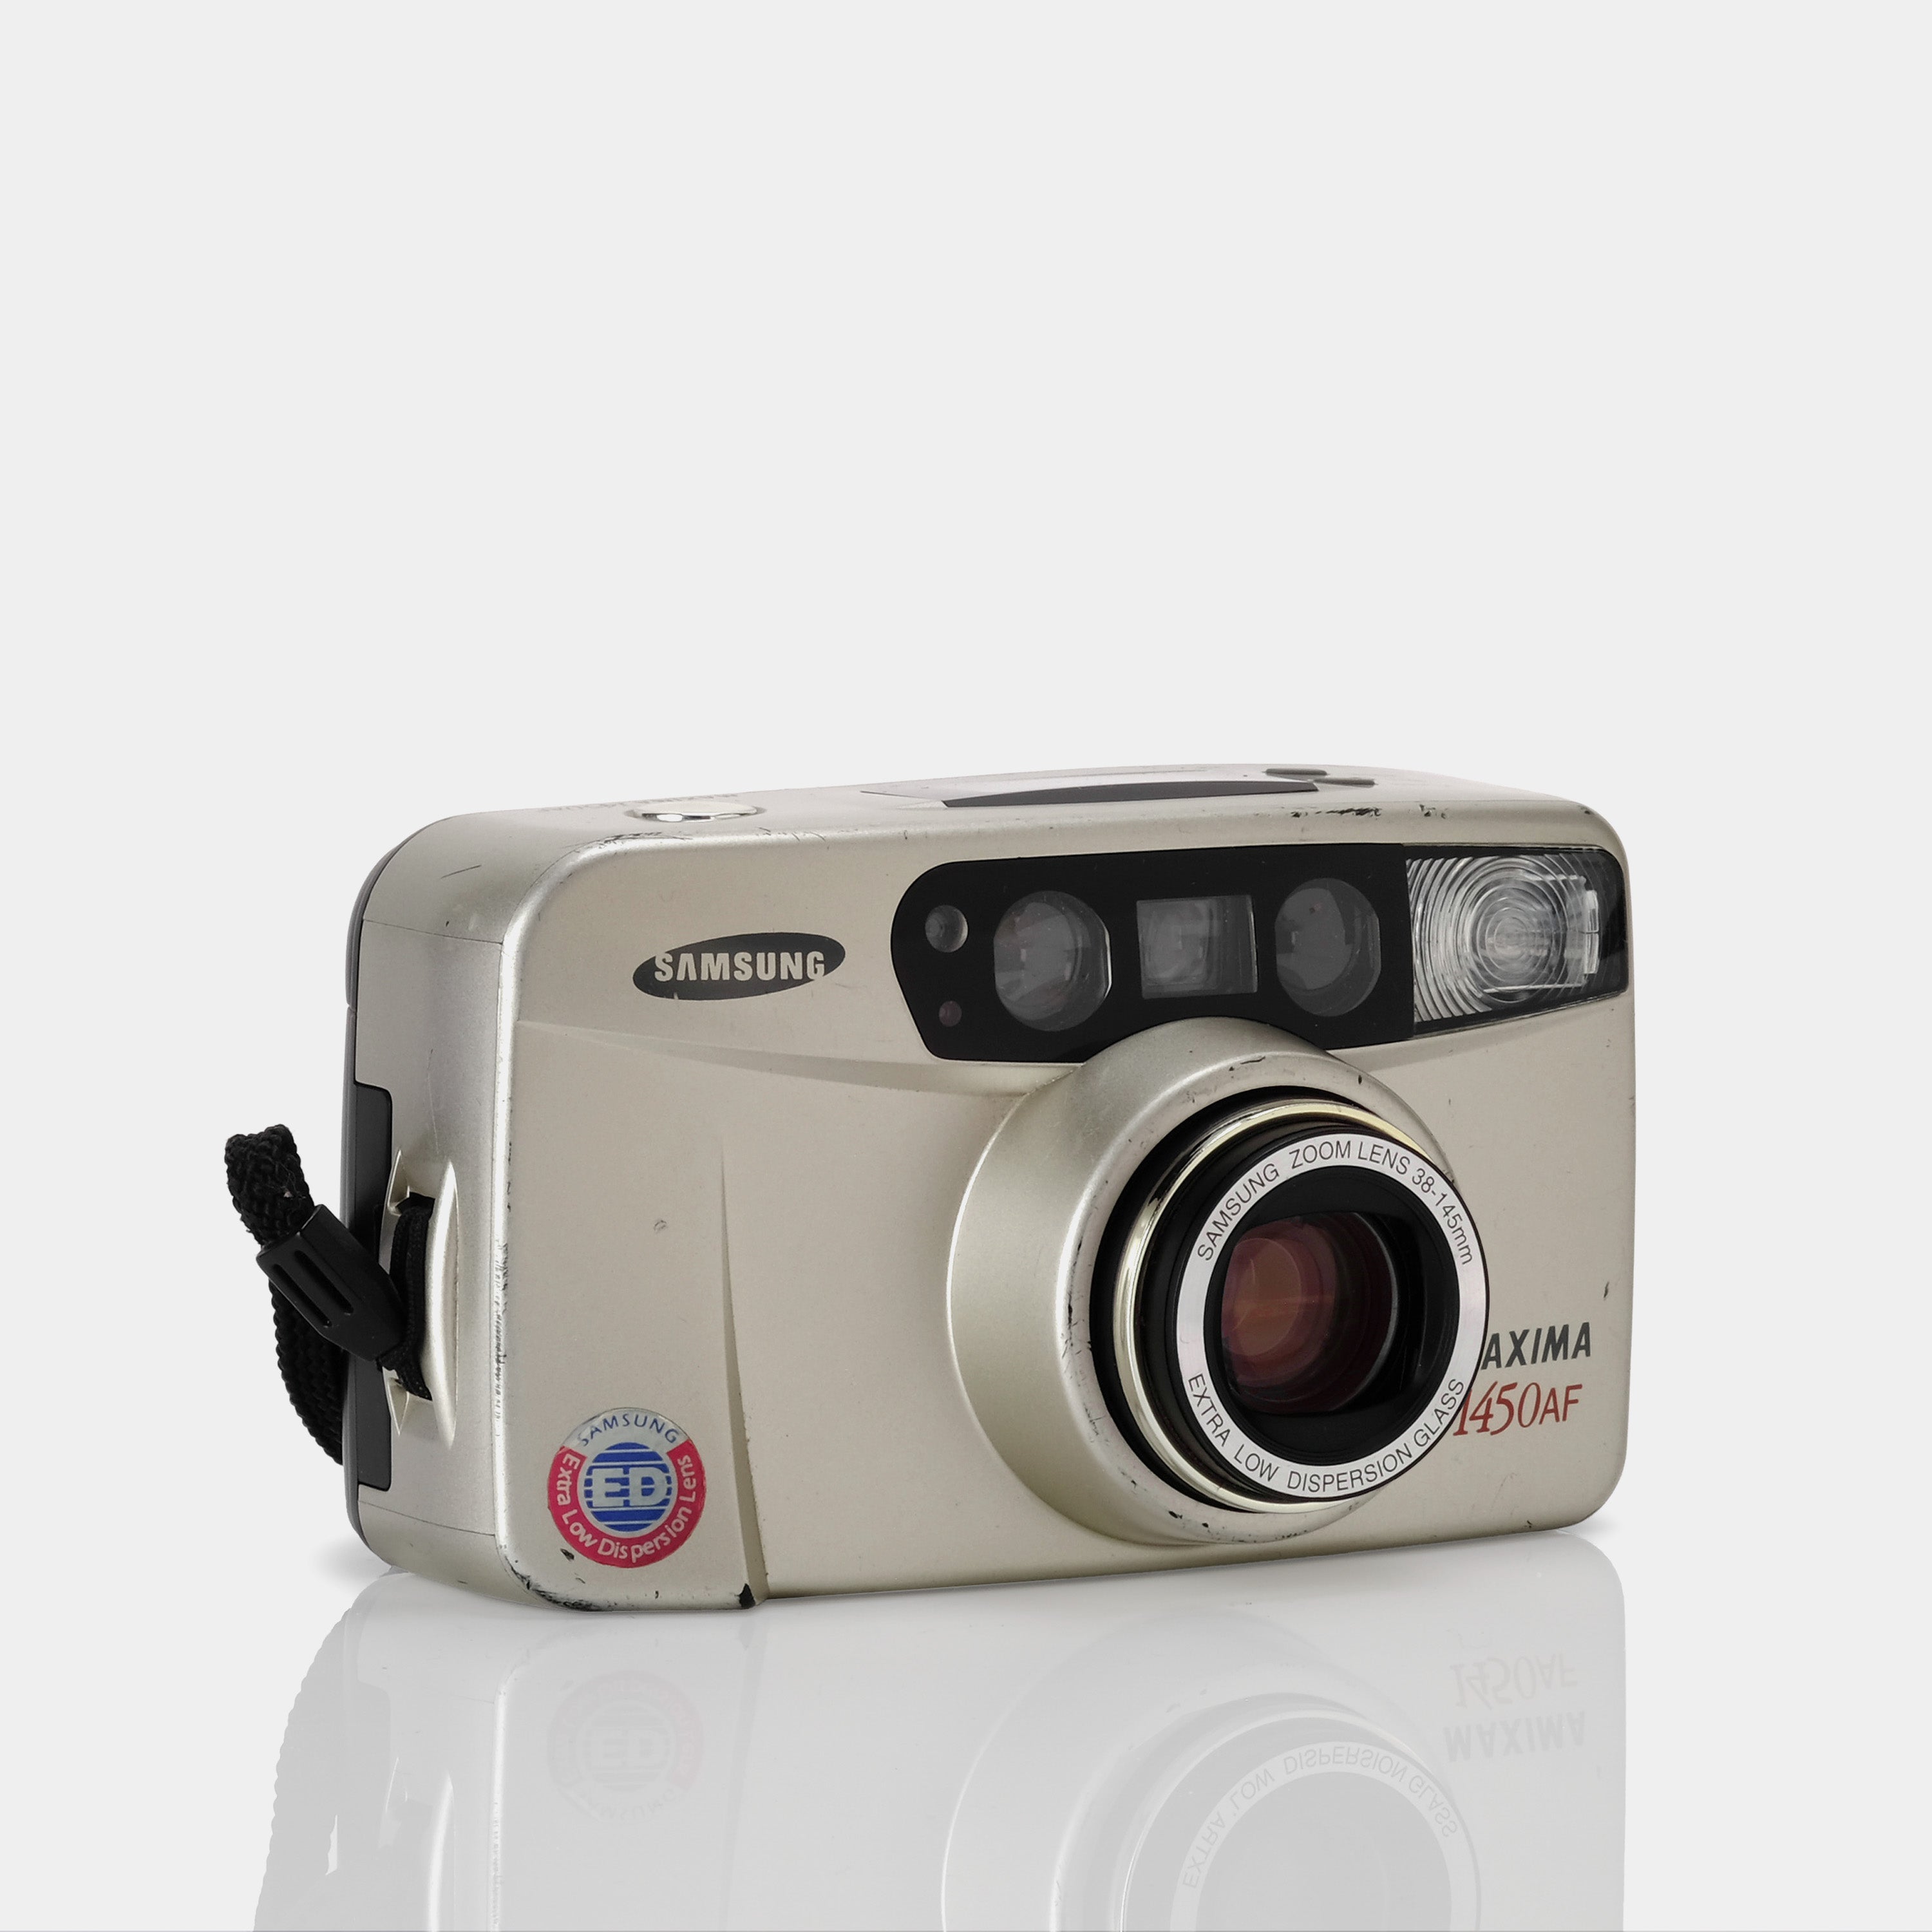 Samsung Maxima 1450AF 35mm Point and Shoot Film Camera